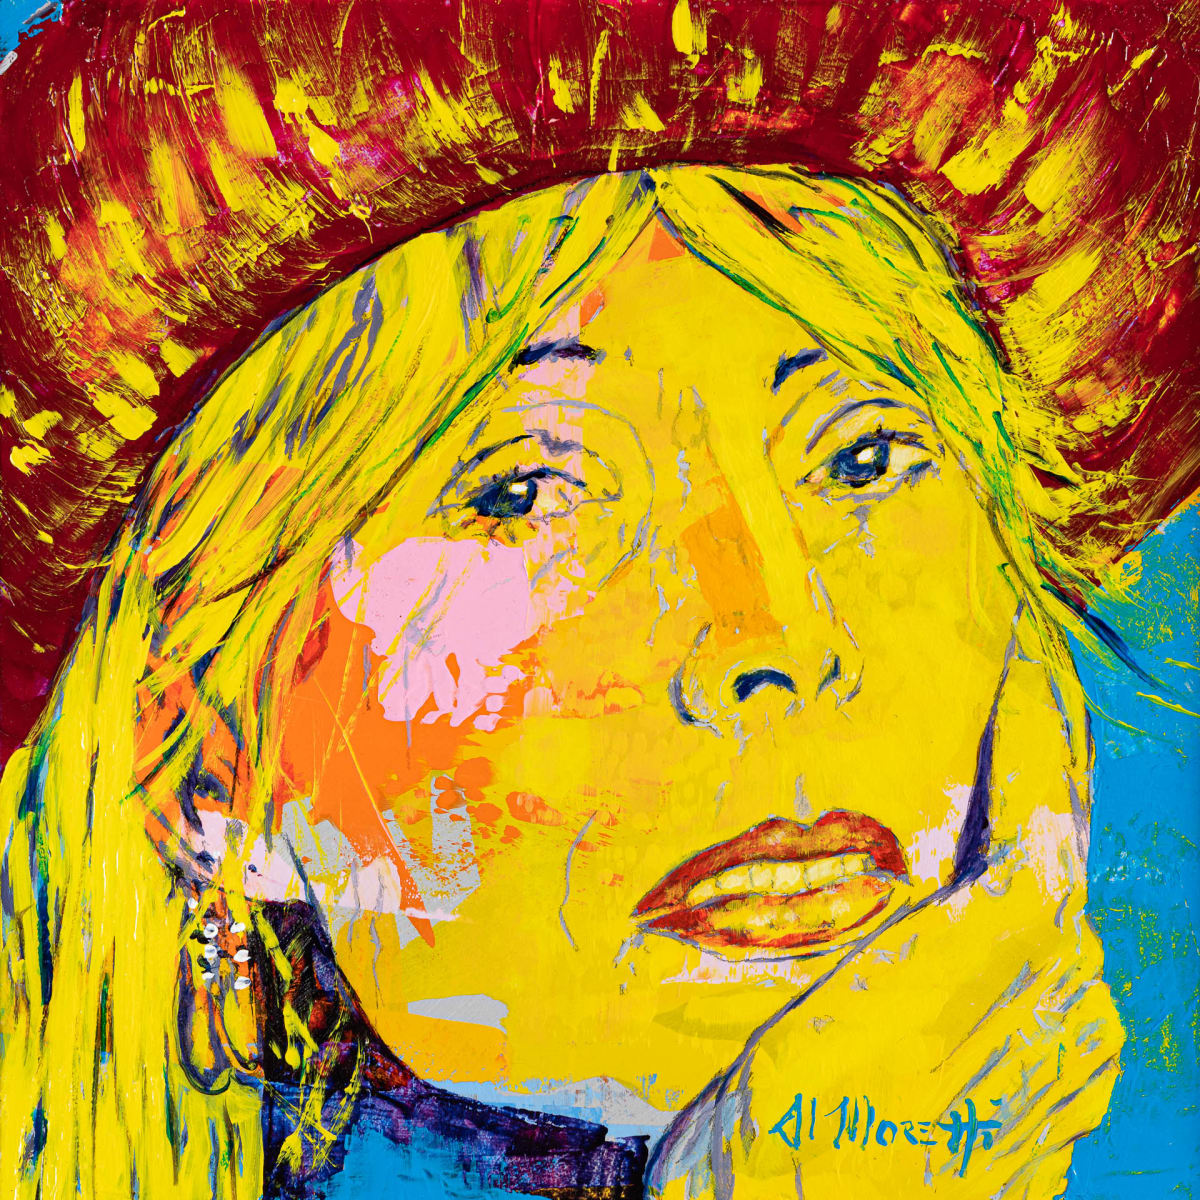 Joni Mitchell, "Court and Spark" by Al Moretti 